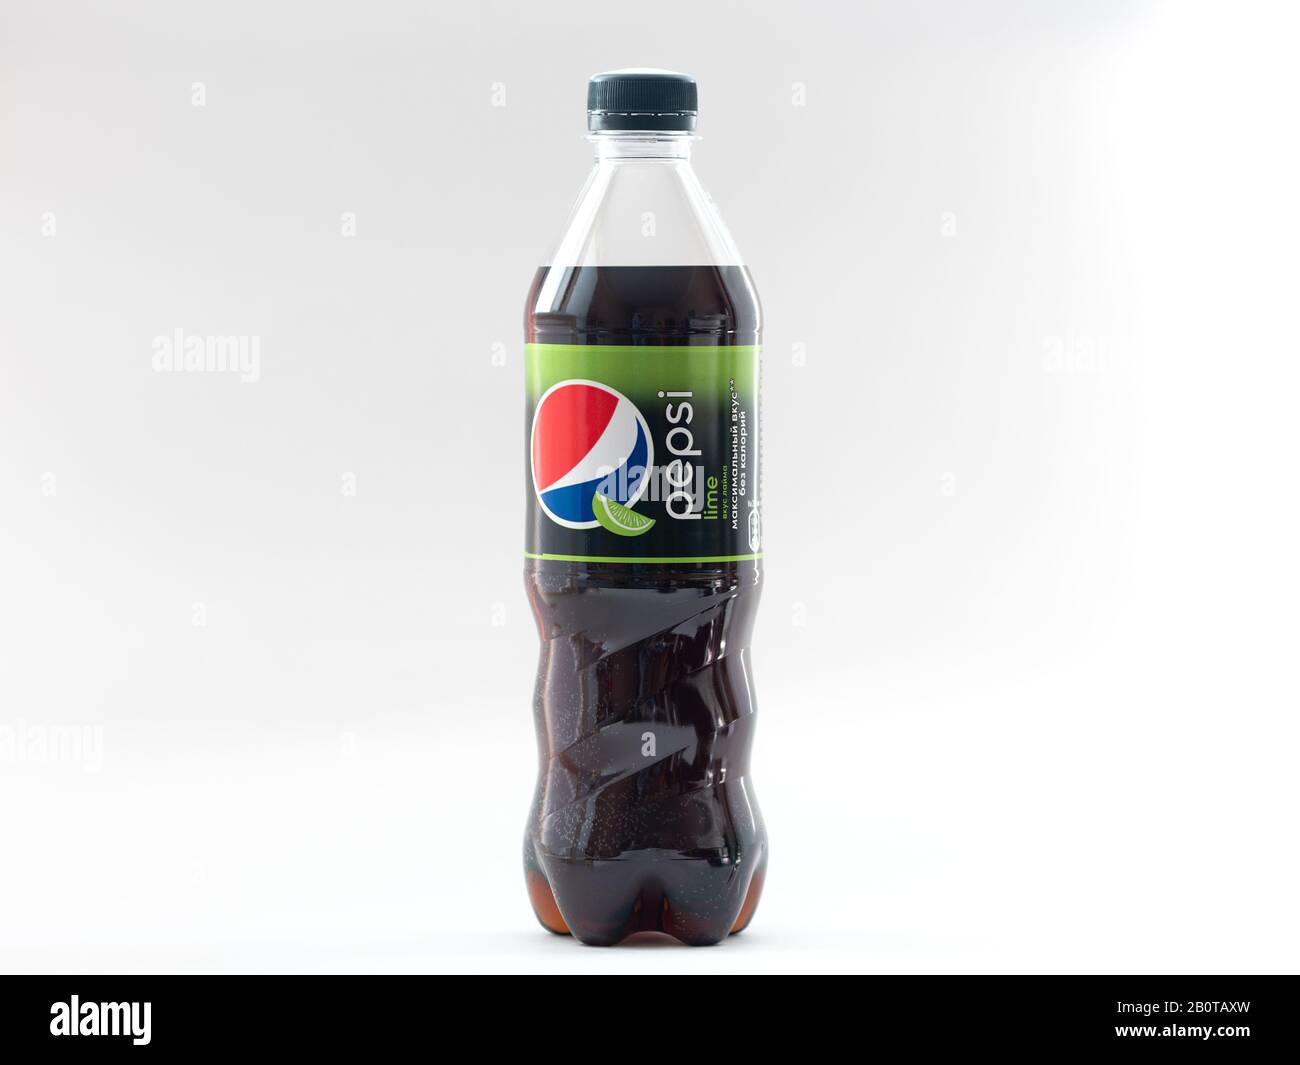 VLADIVOSTOK, RUSSIA - FEBRUARY 14, 2020: Bottle of Pepsi Cola Can on white background. Pepsi produced by PepsiCo. Stock Photo